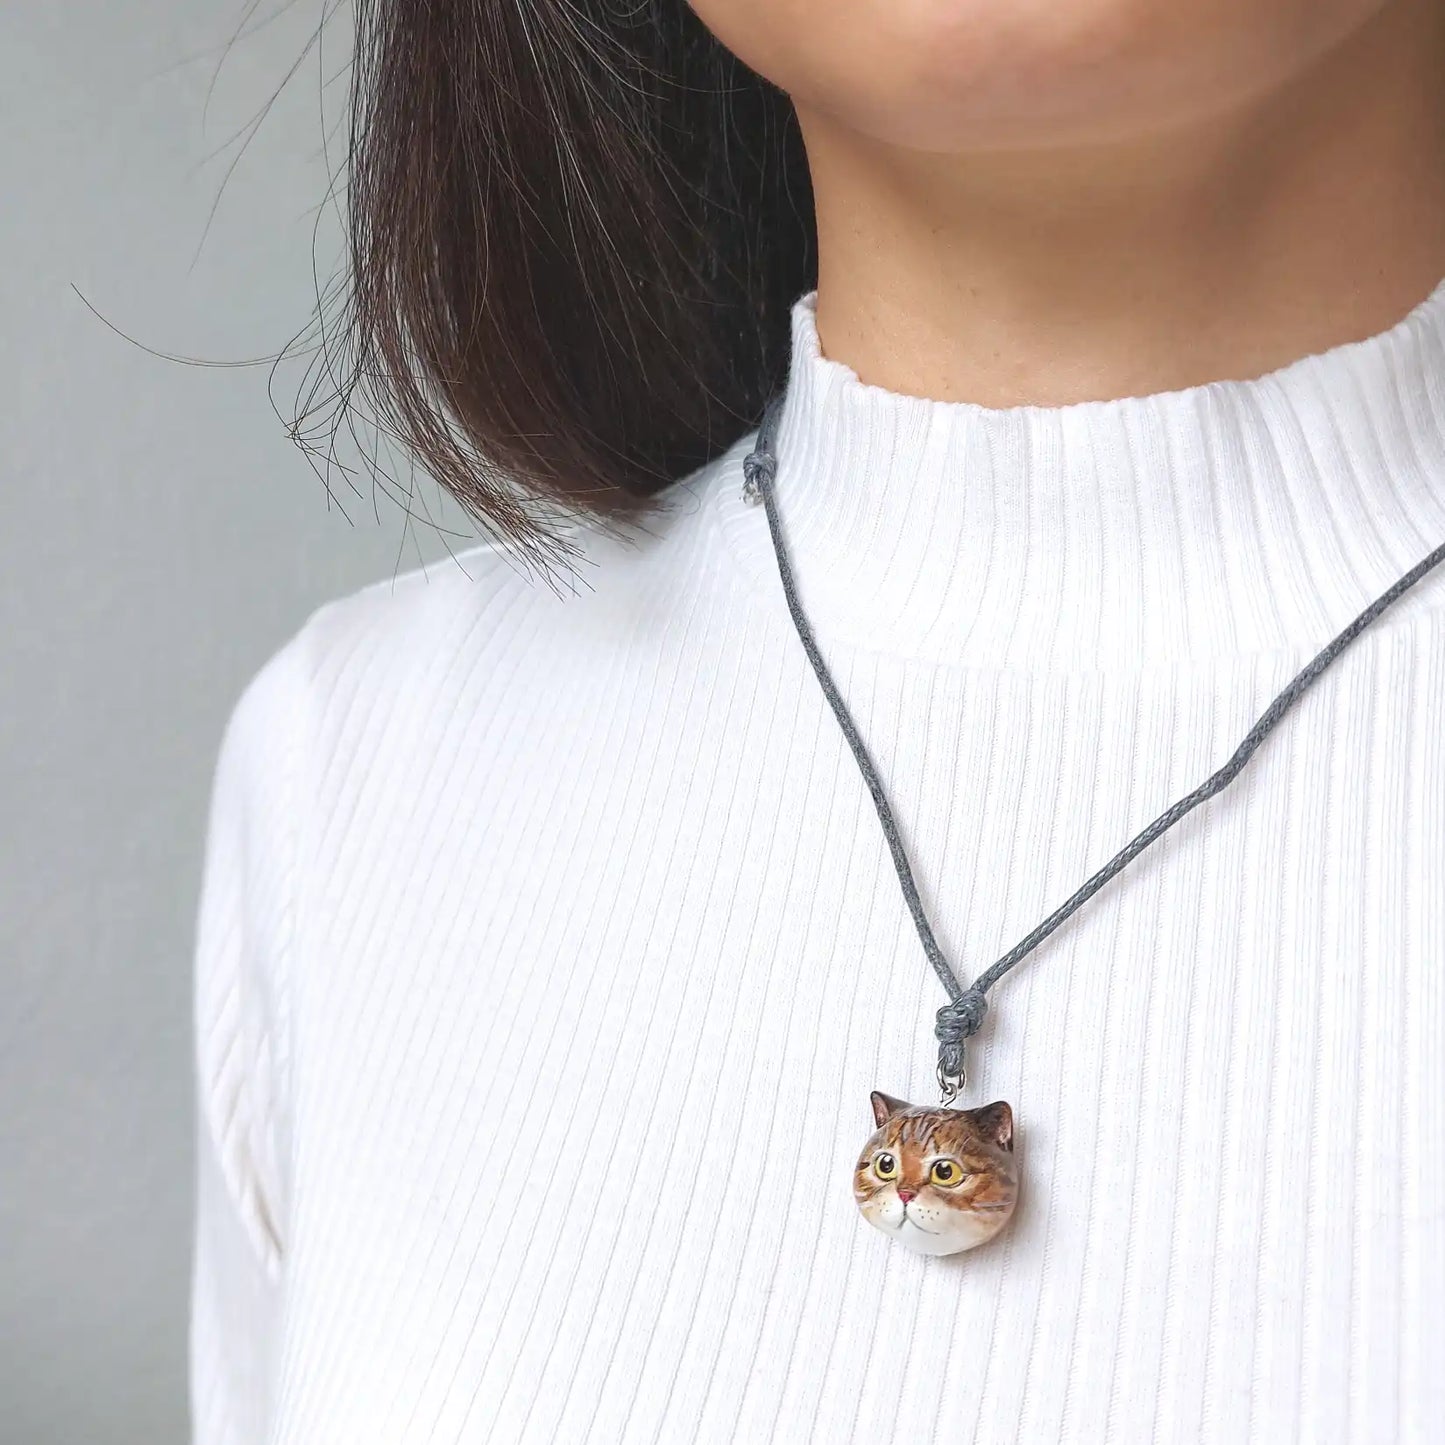 wearing a British shorthair Tabby pendant necklace